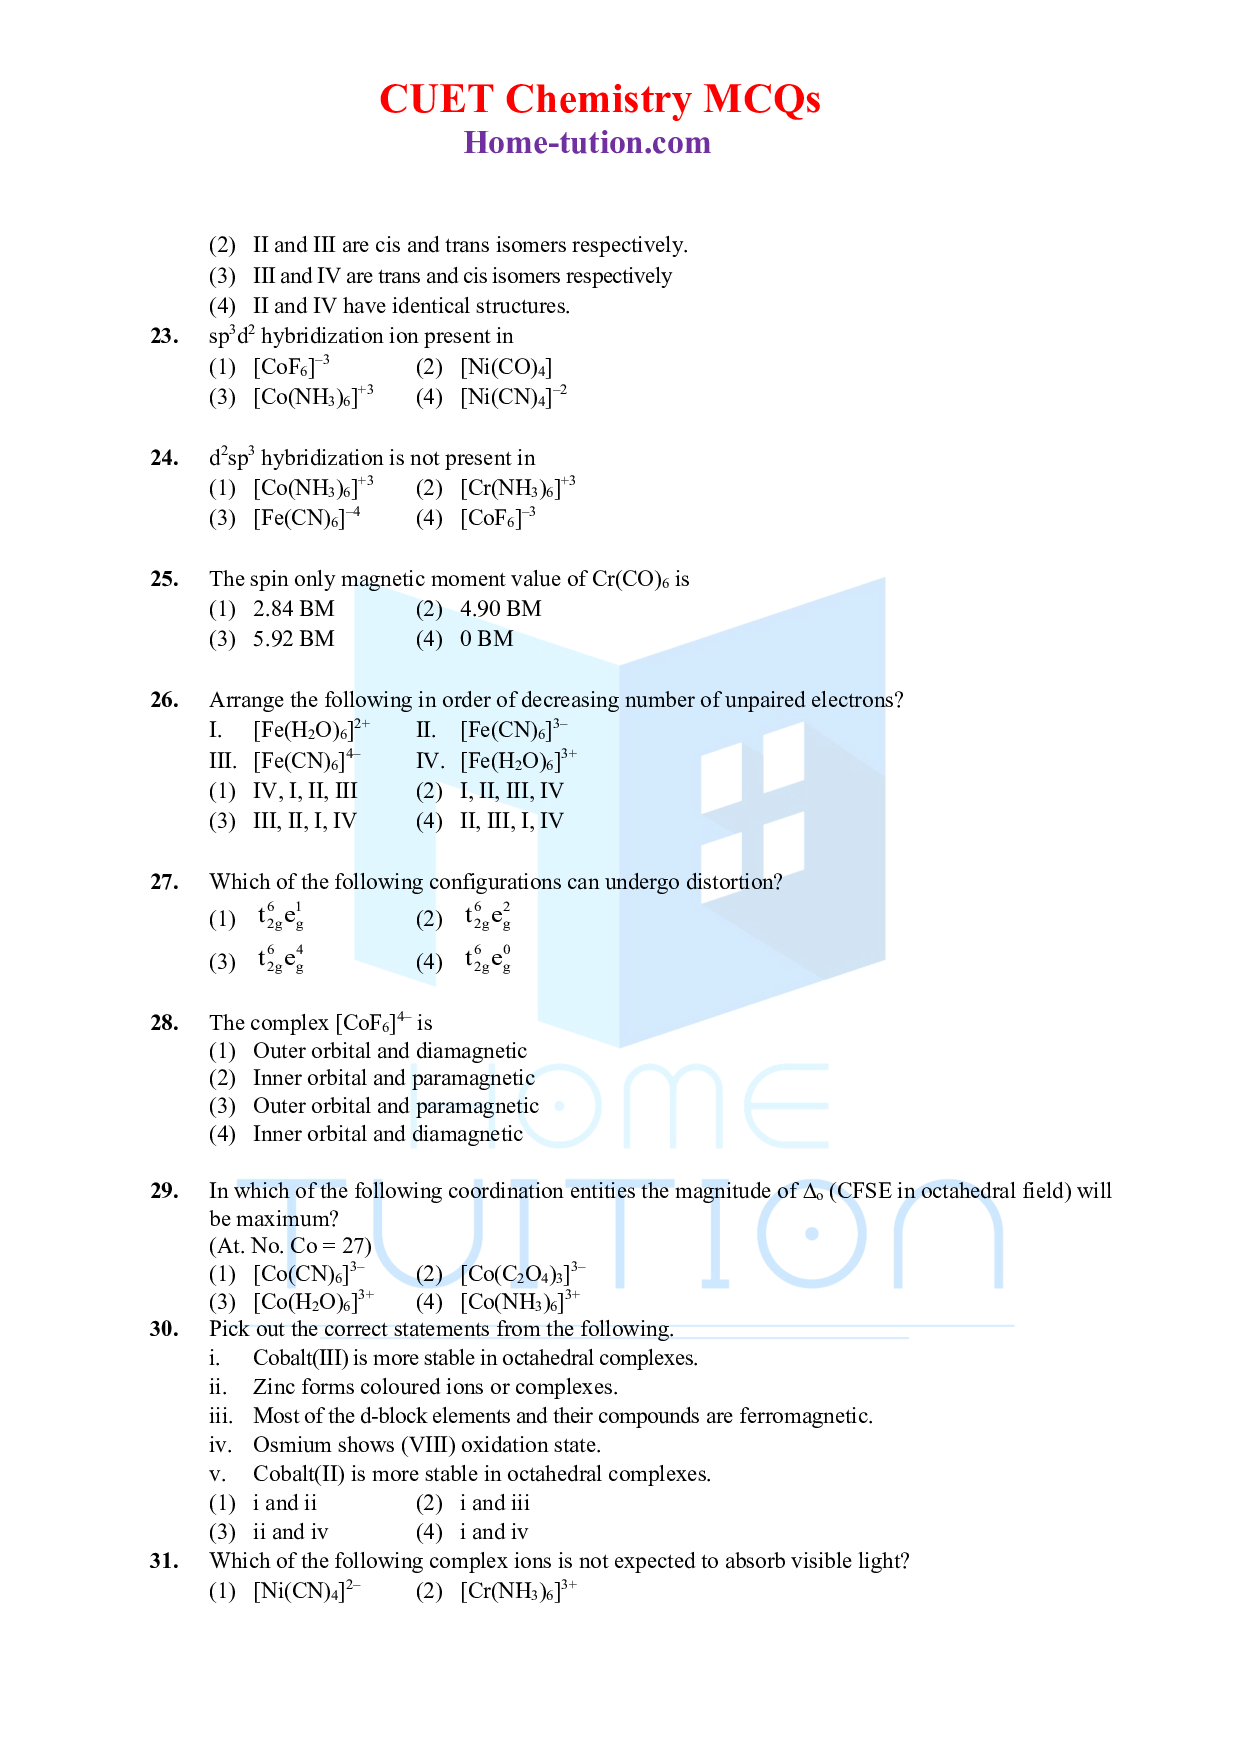 CUET MCQ Questions For Chapter-09 Coordination Compounds